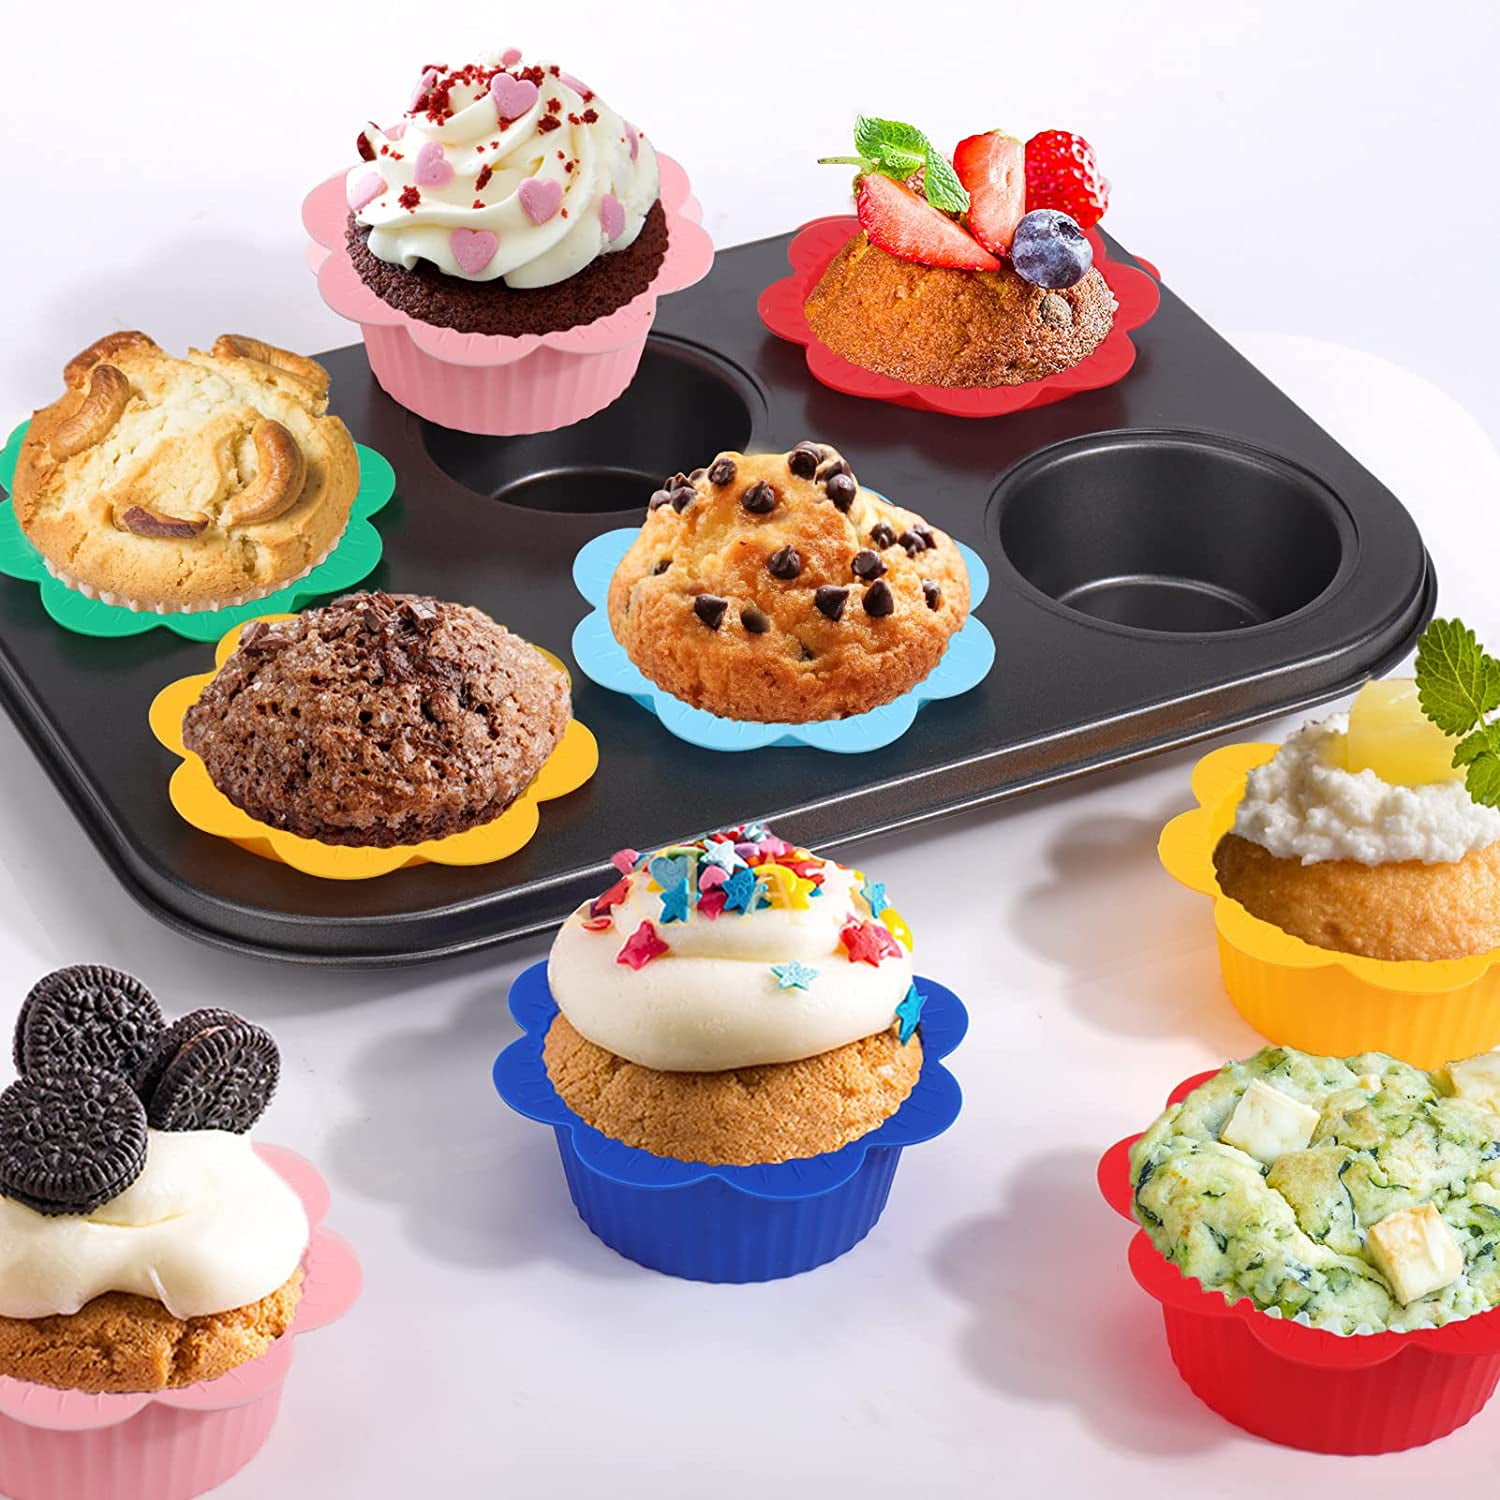 Reusable Cupcake Liners 36 Pcs Silicone Lunch Box Dividers, Non-Stick  Food-Grade Silicone Muffin Cups, Bento Box Accessories for Kids